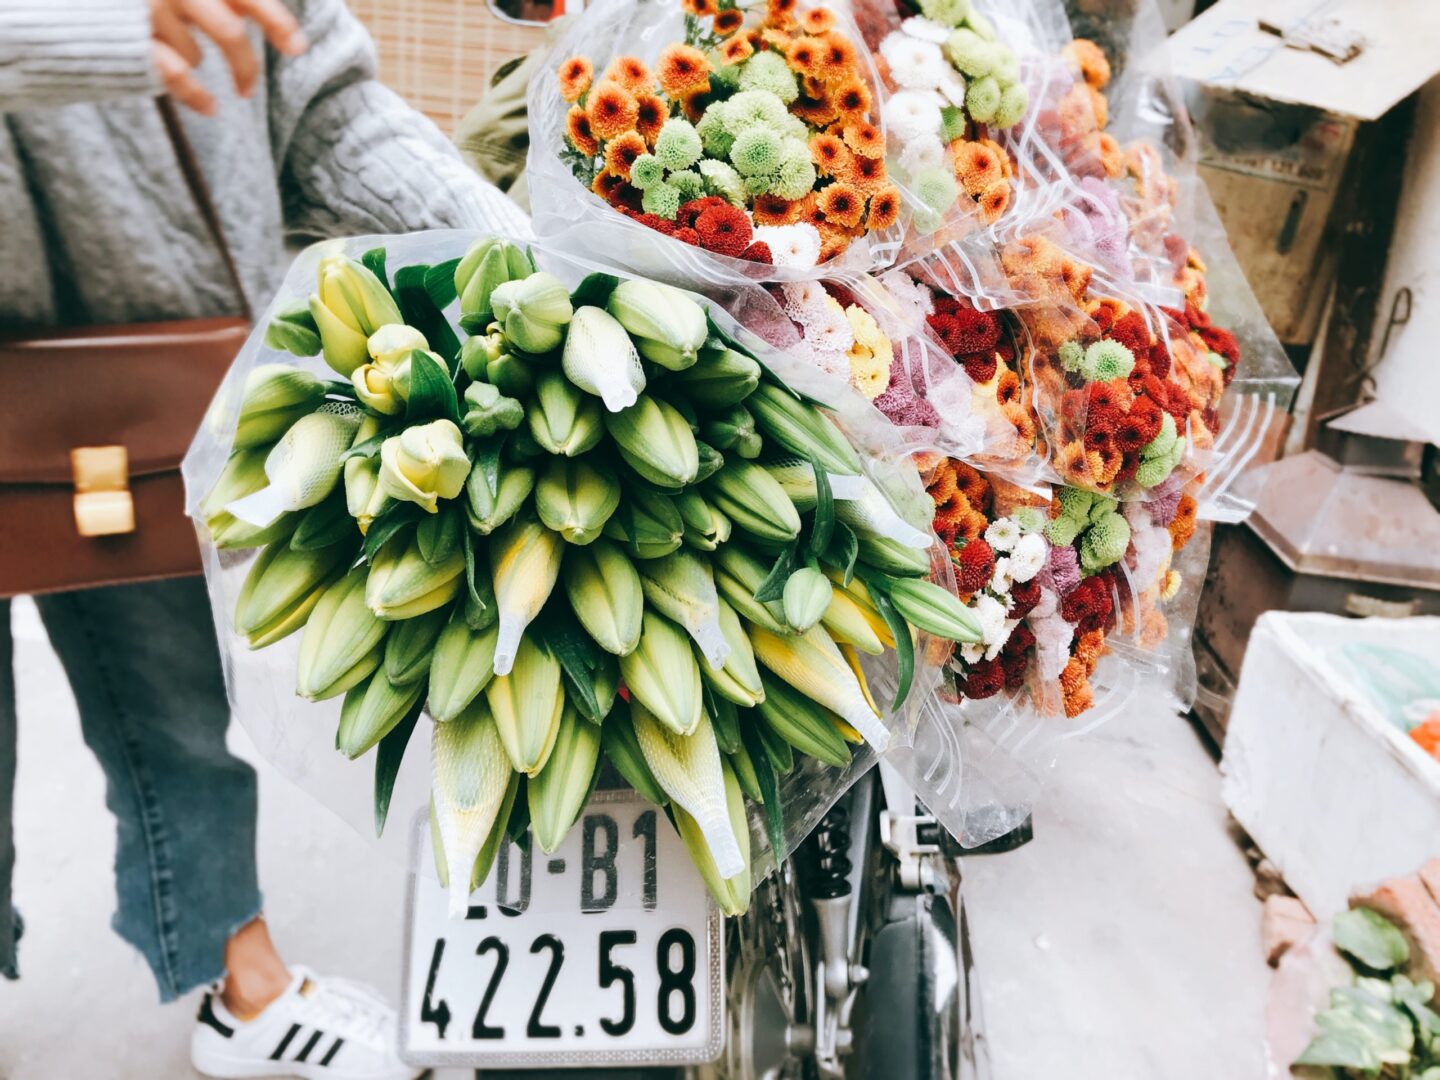 Flower delivery services can be easy to use.